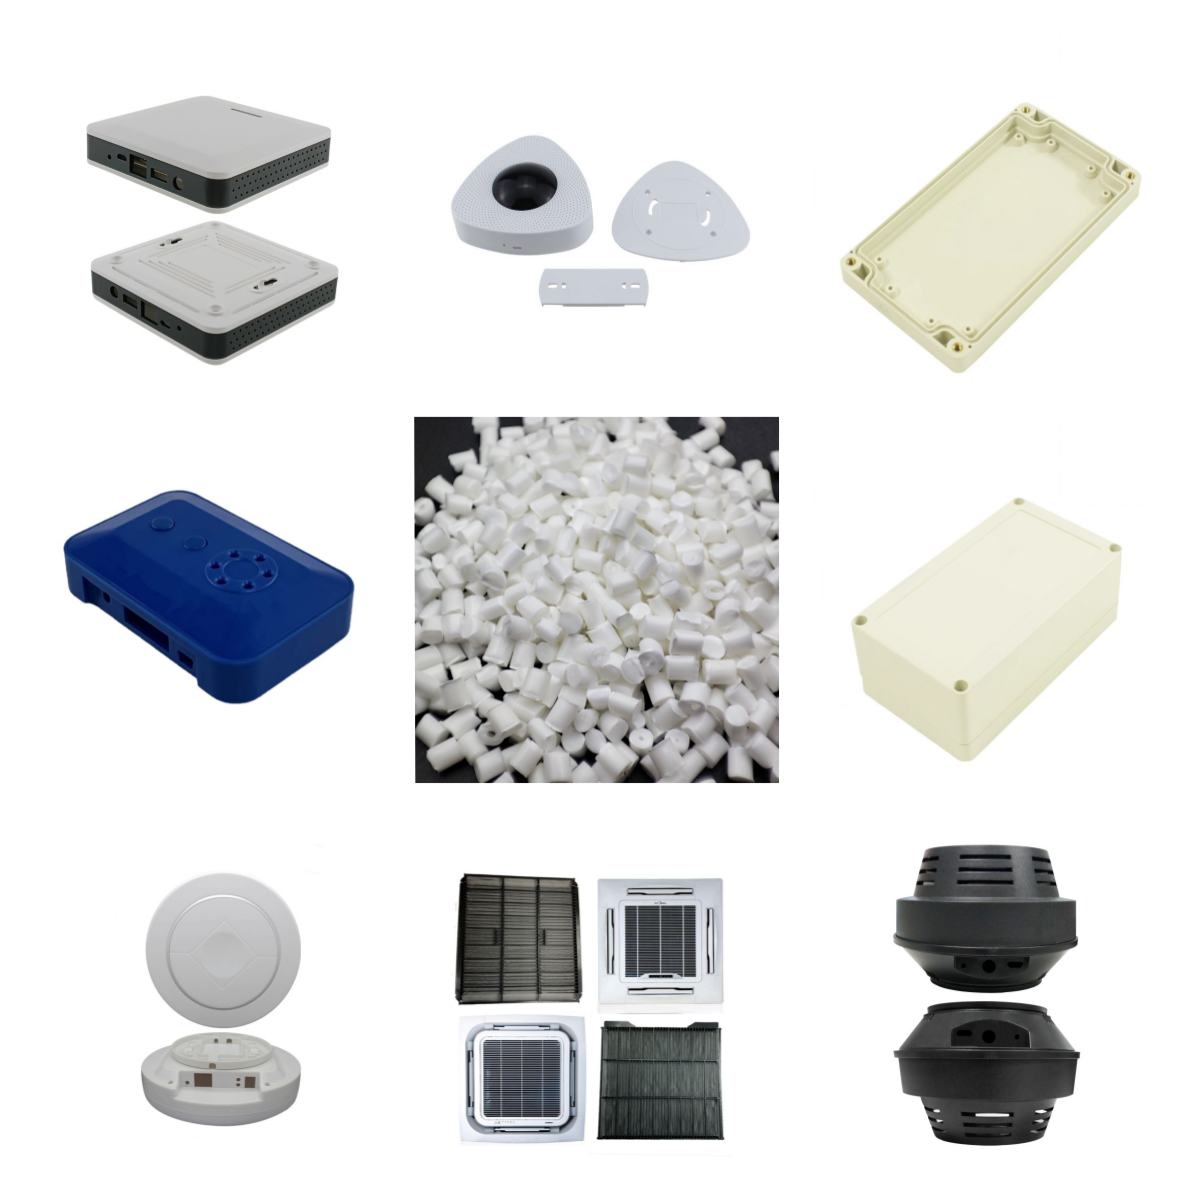 Conductive Internally Lubricated Wear-resistant And Flame Retardant Polycarbonate (PC) Resin Particles